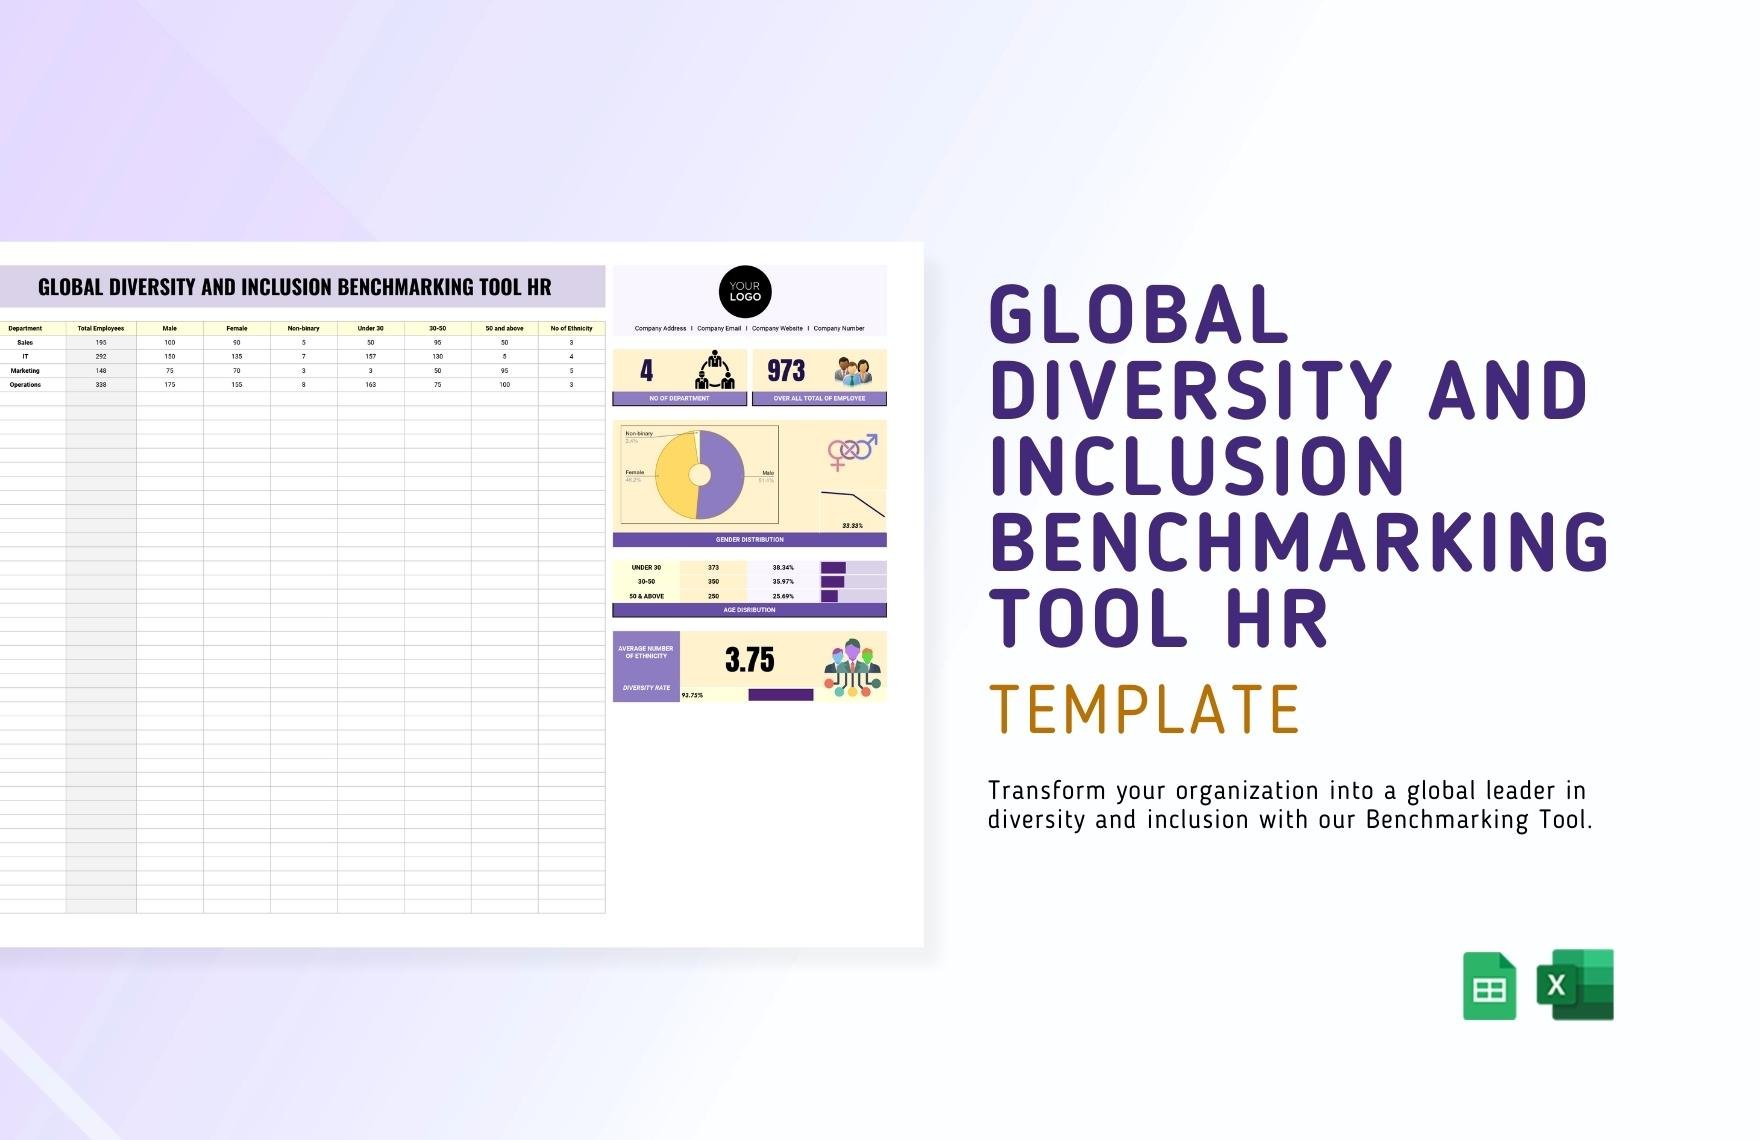 Global Diversity and Inclusion Benchmarking Tool HR Template